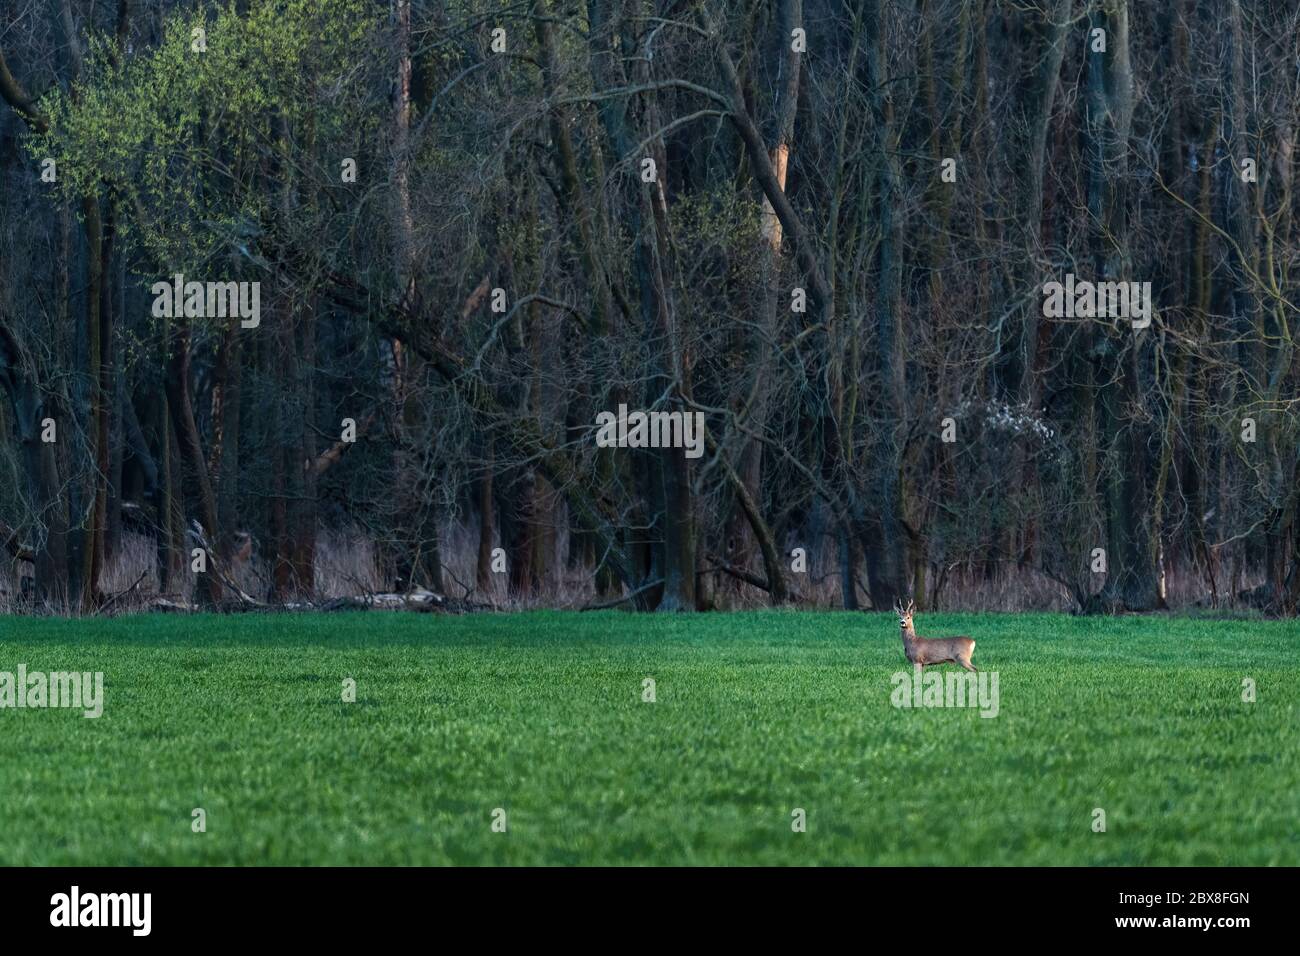 European Roe Deer - Capreolus capreolus, common deer from European forests, woodlands and meadows, Czech Republic. Stock Photo